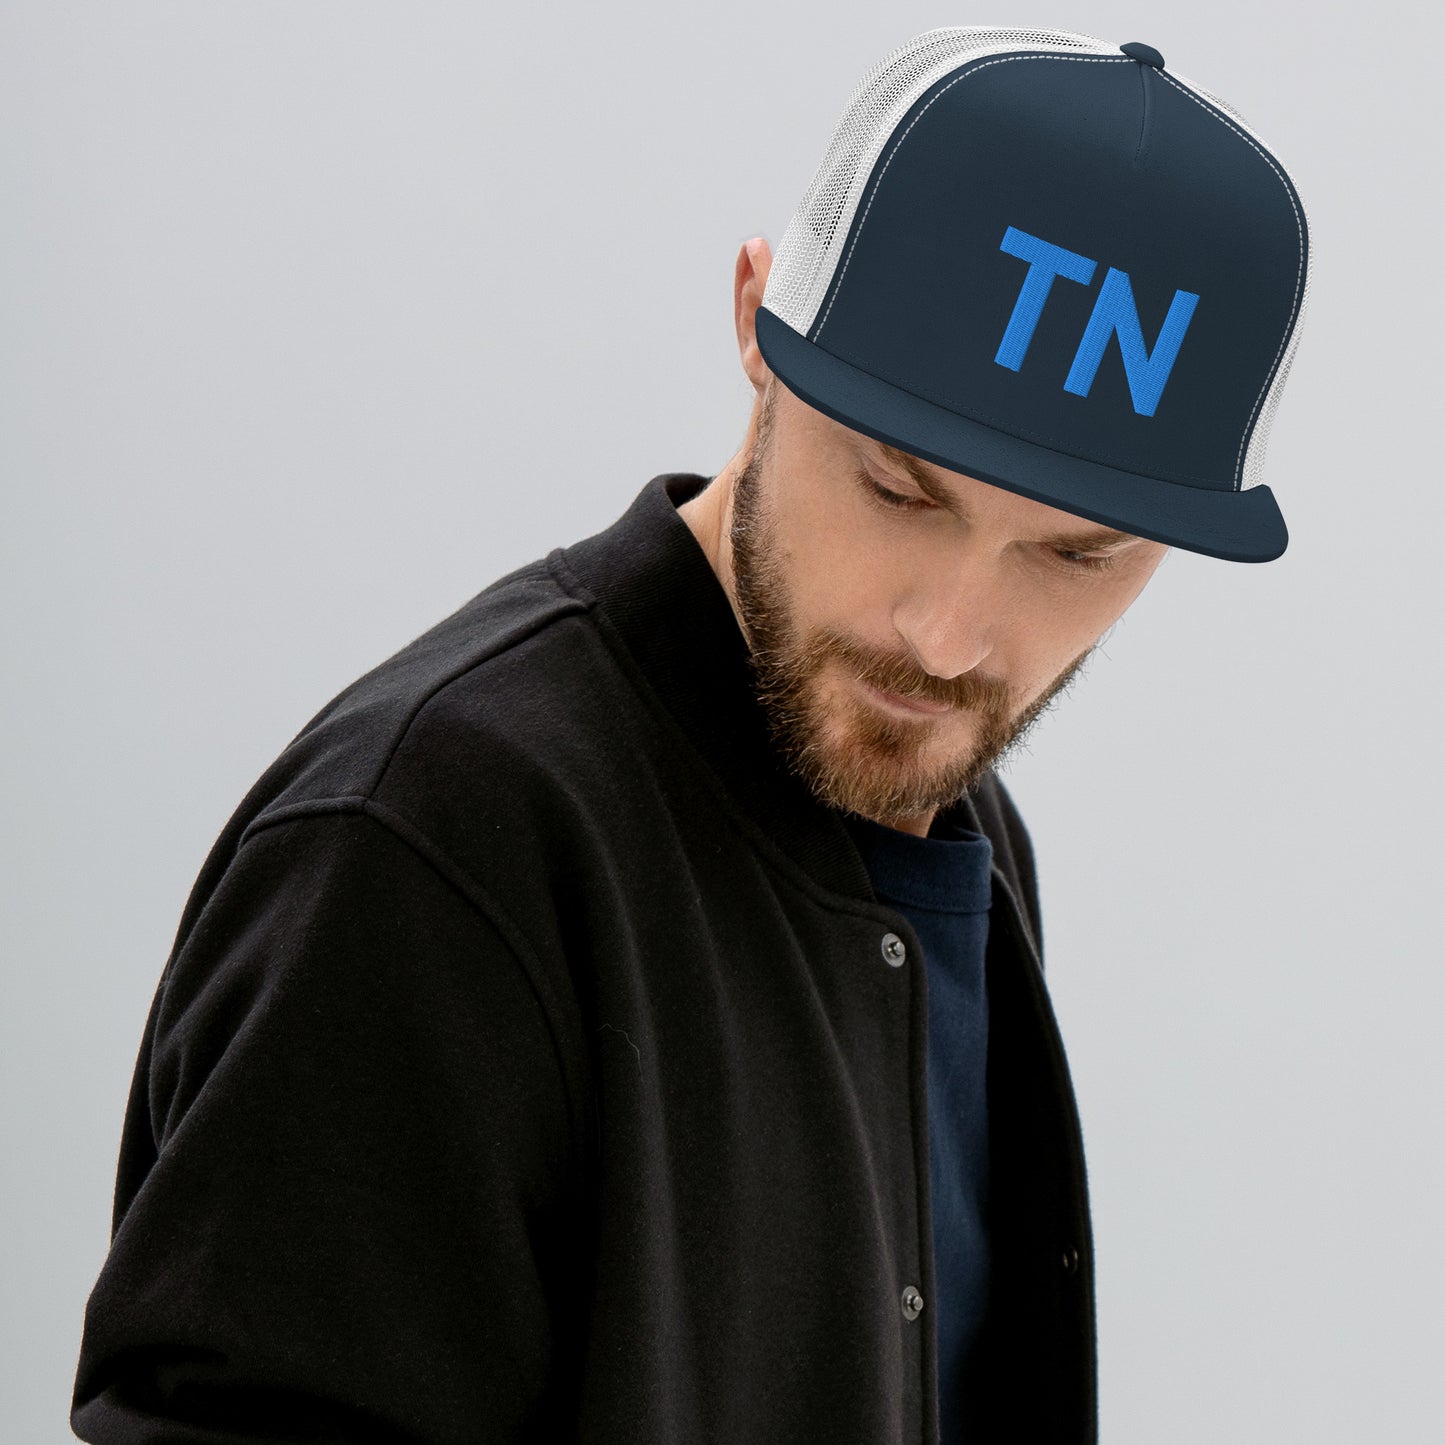 TN Tennessee Strong Trucker Hat